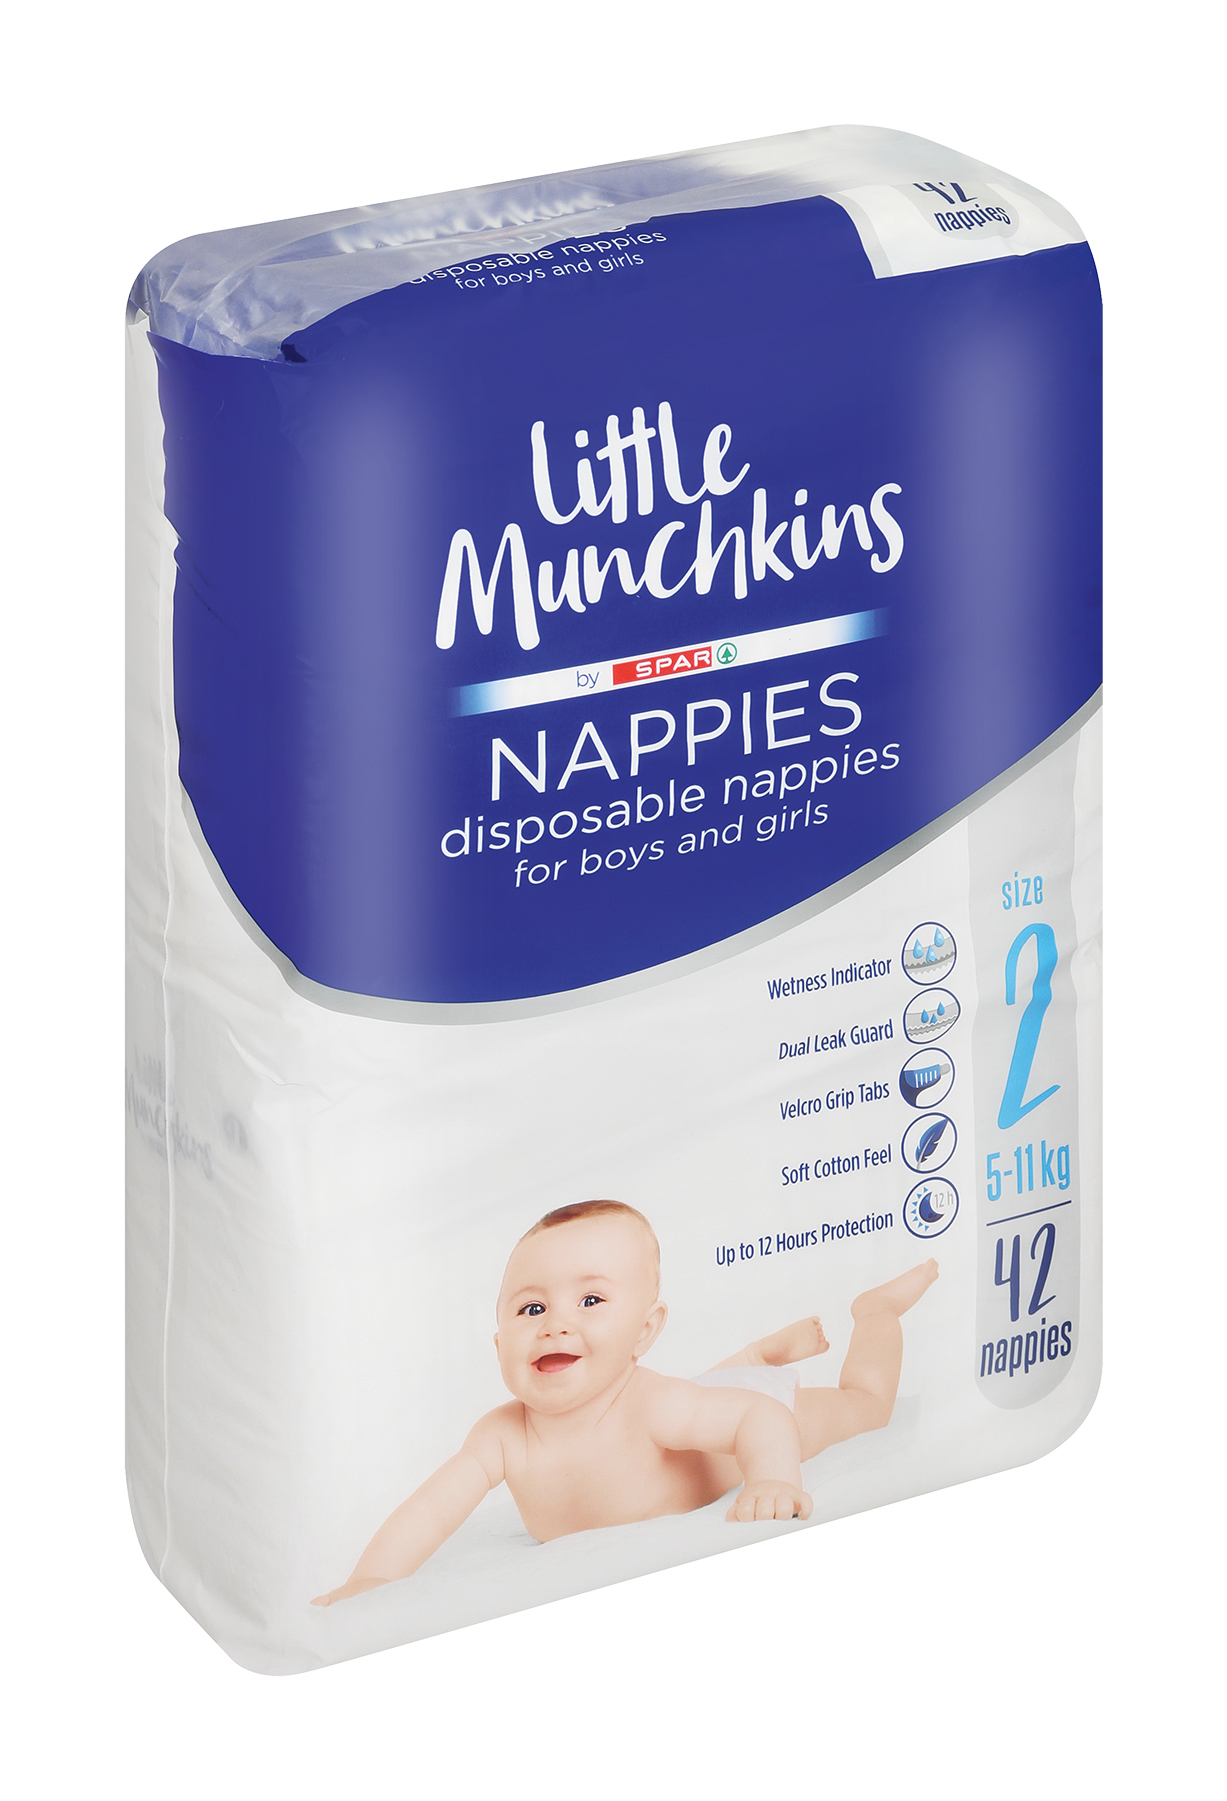 little munchkins by spar disposable nappies 2